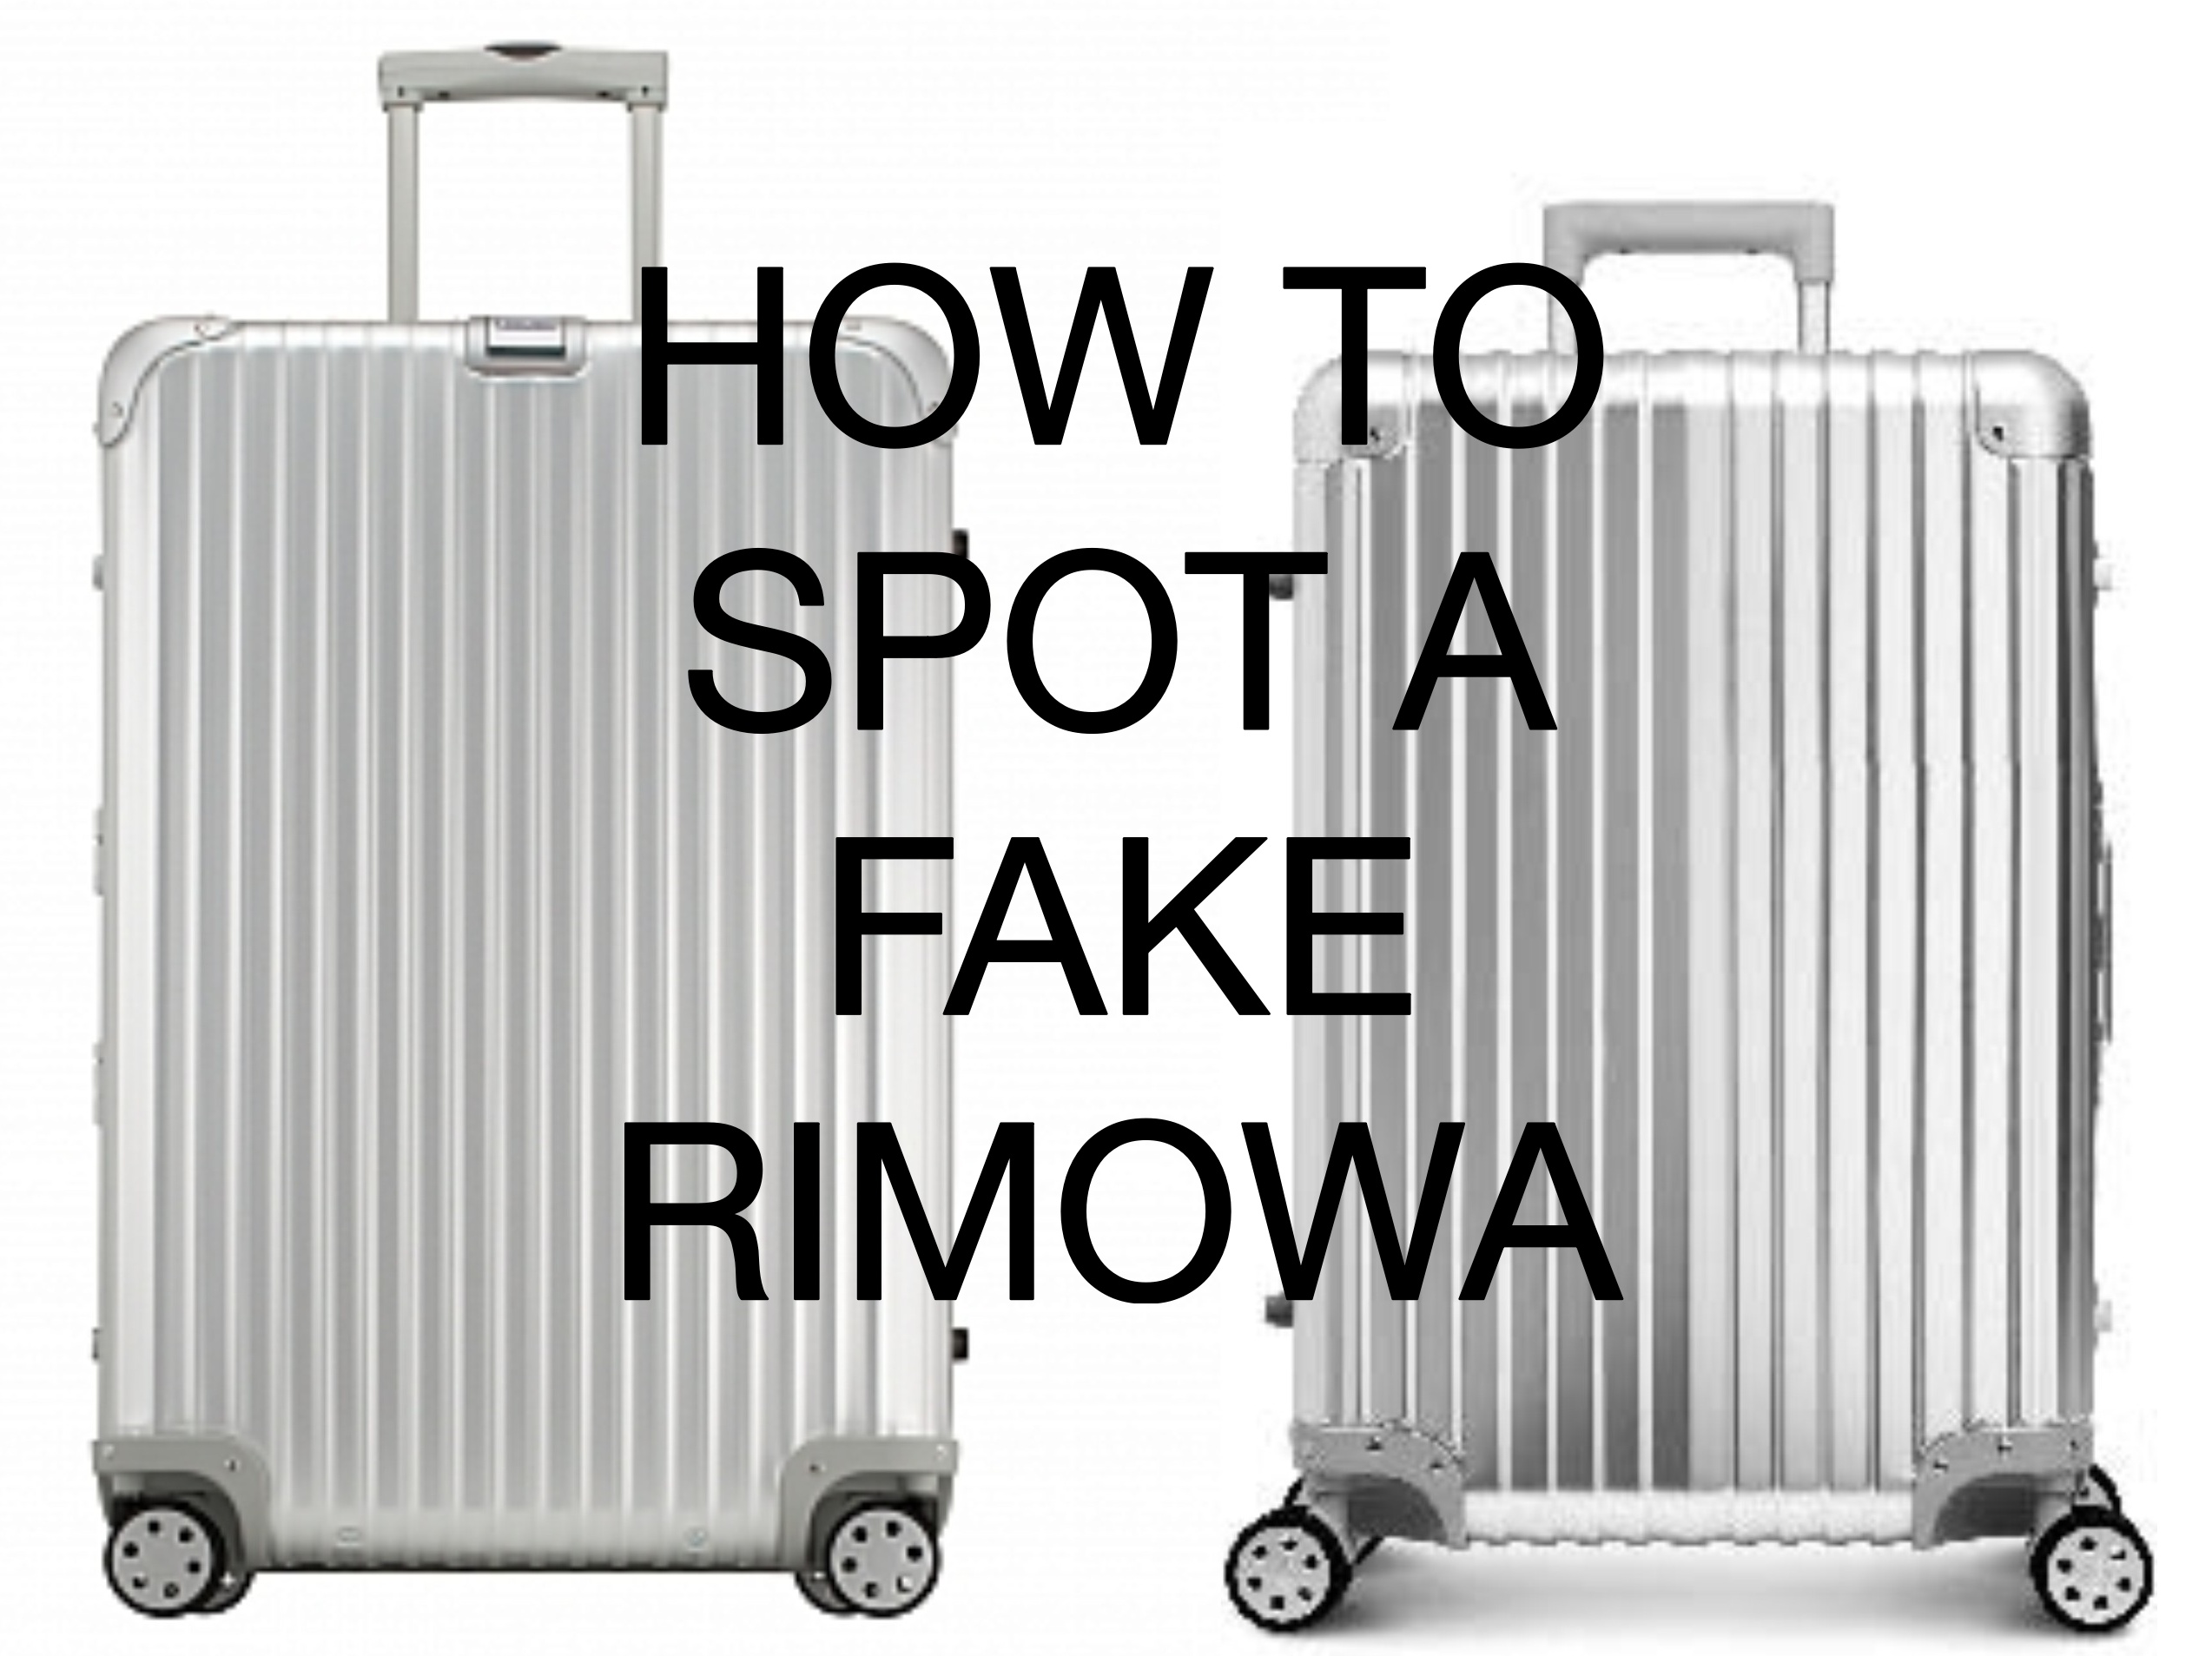 How to recognize a fake Rimowa